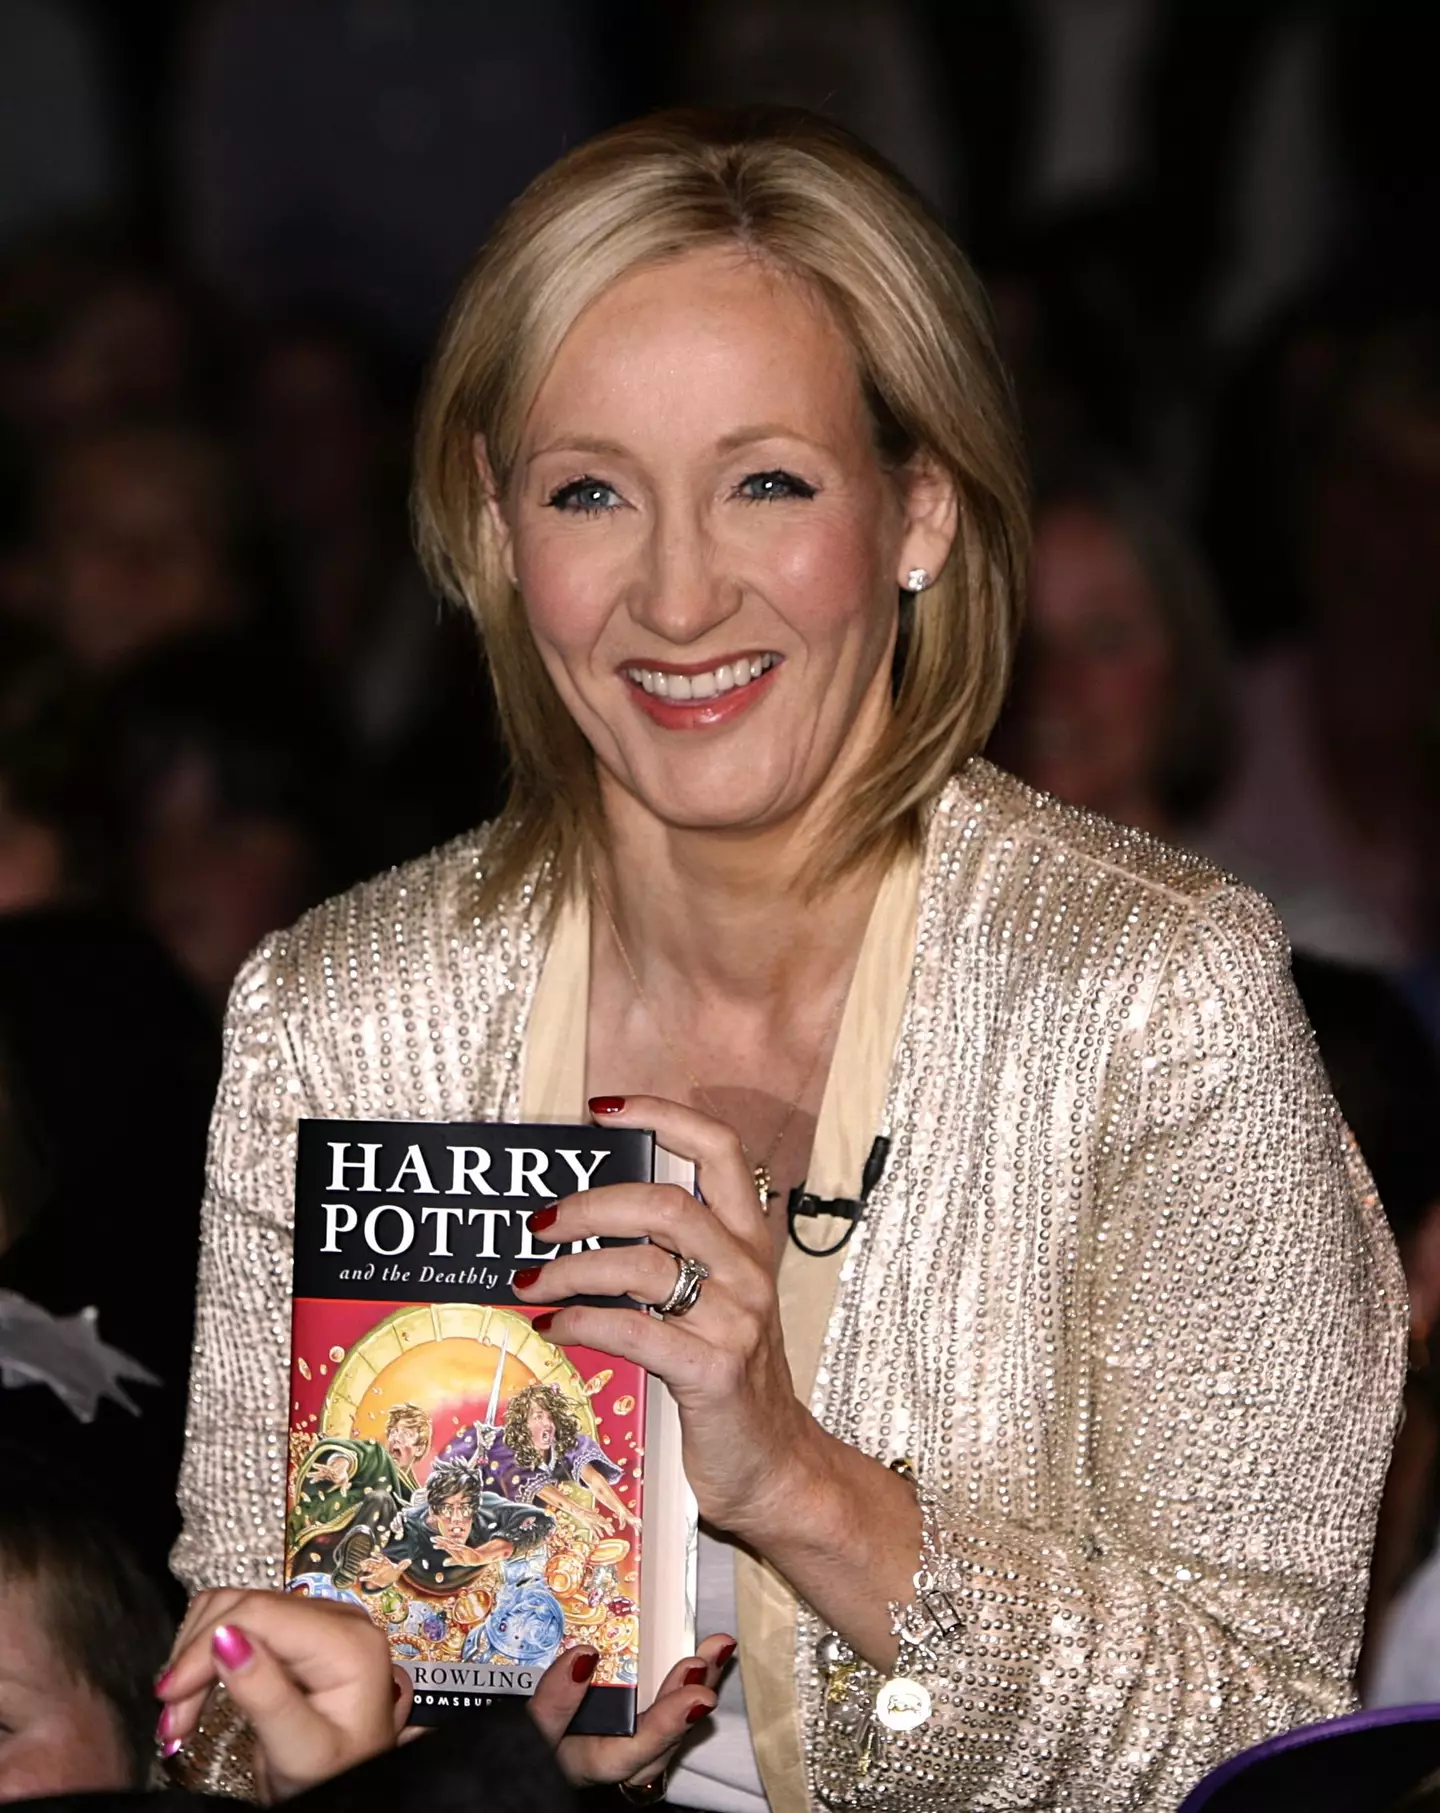 JK Rowling has been heavily criticised over her comments on the trans community.